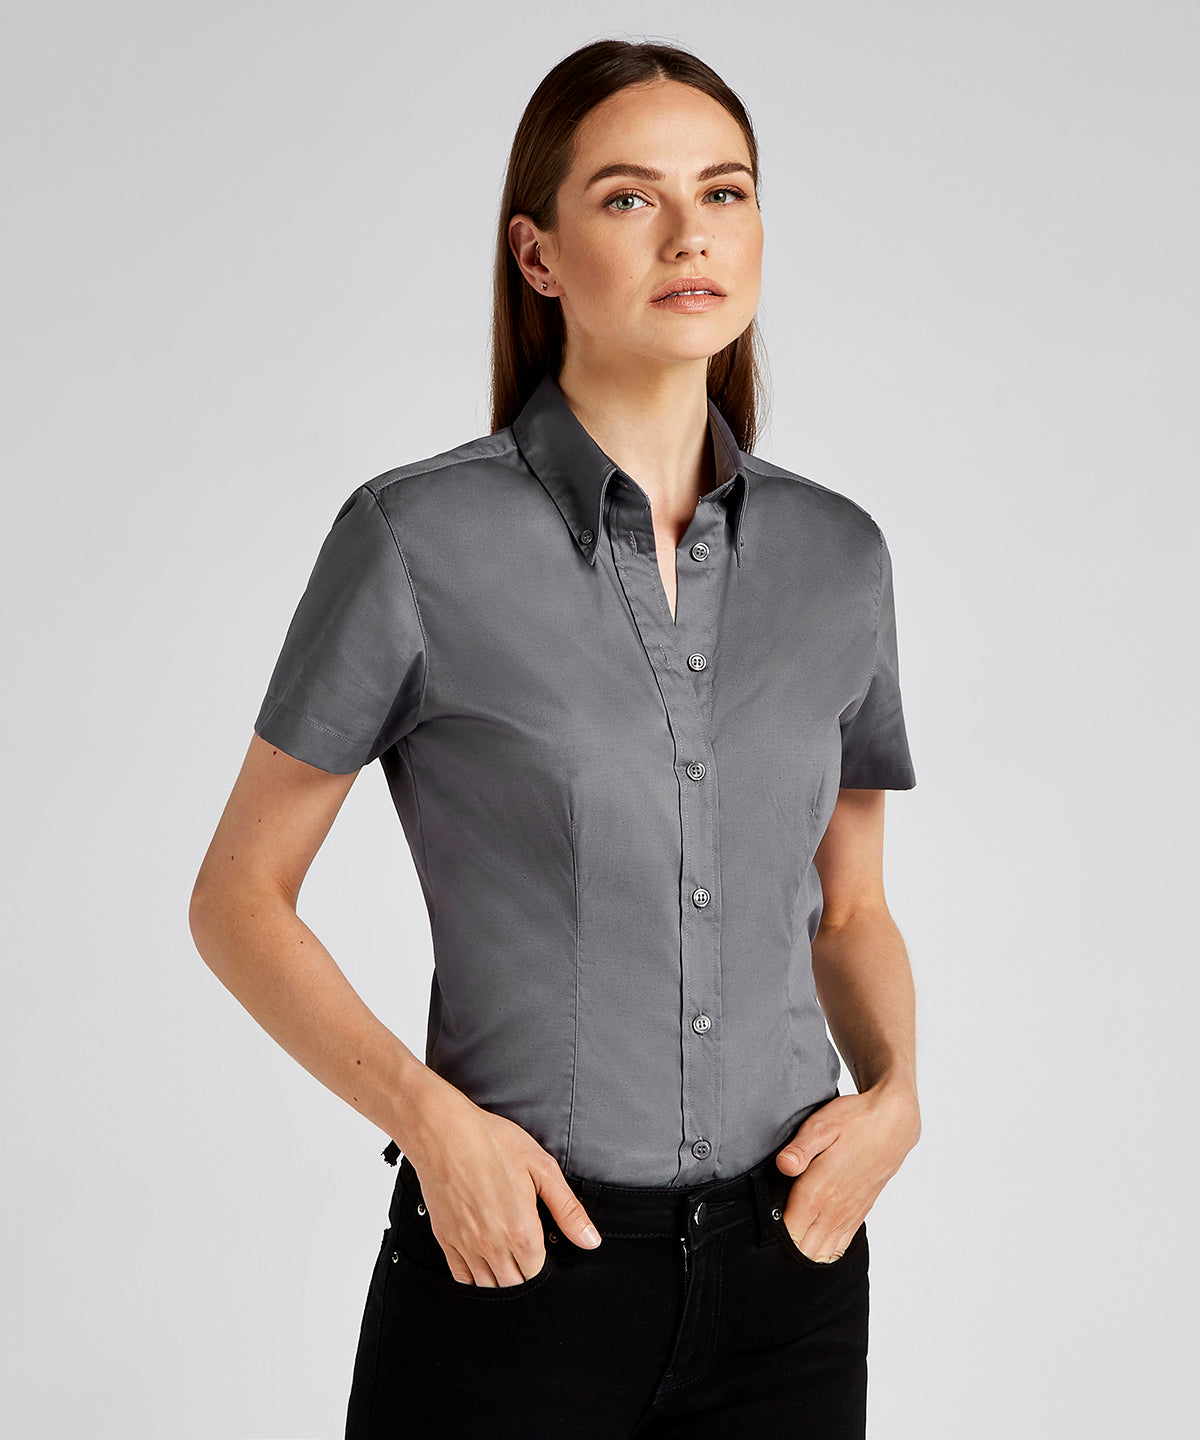 Blússur - Women's Corporate Oxford Blouse Short-sleeved (tailored Fit)